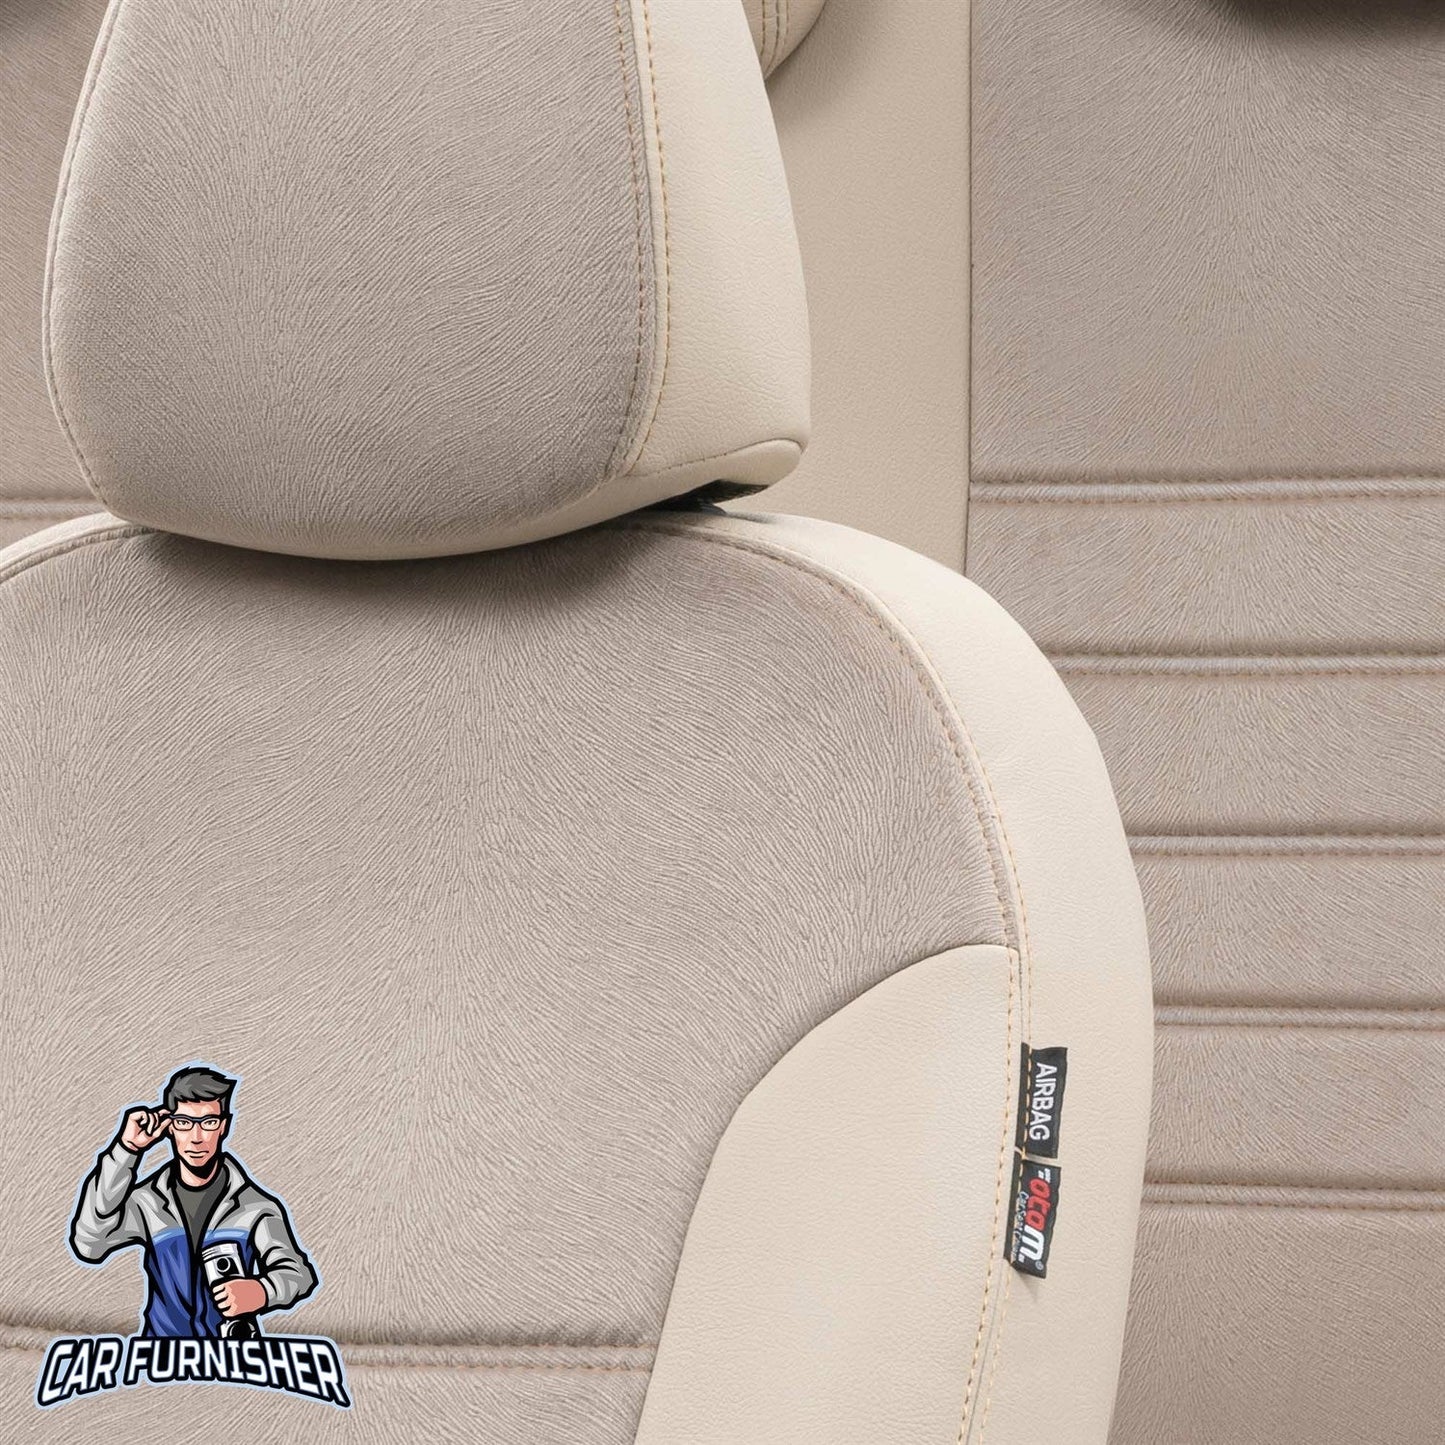 Seat Toledo Seat Covers London Foal Feather Design Beige Leather & Foal Feather